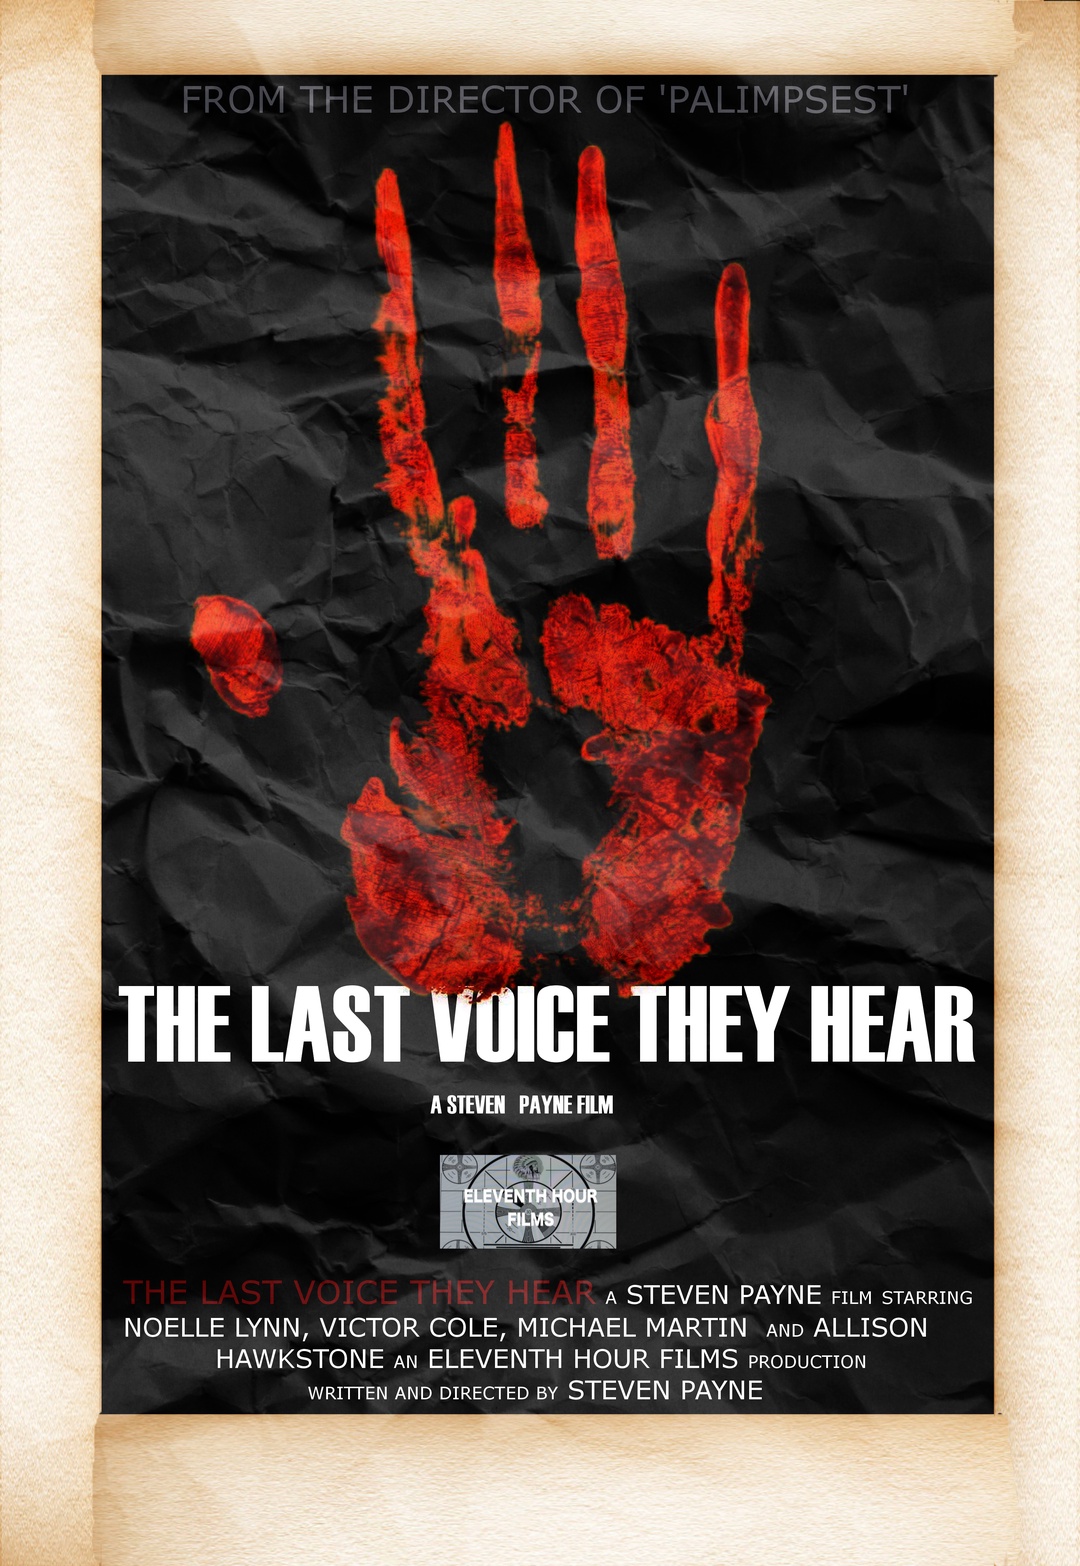 The Last Voice They Hear